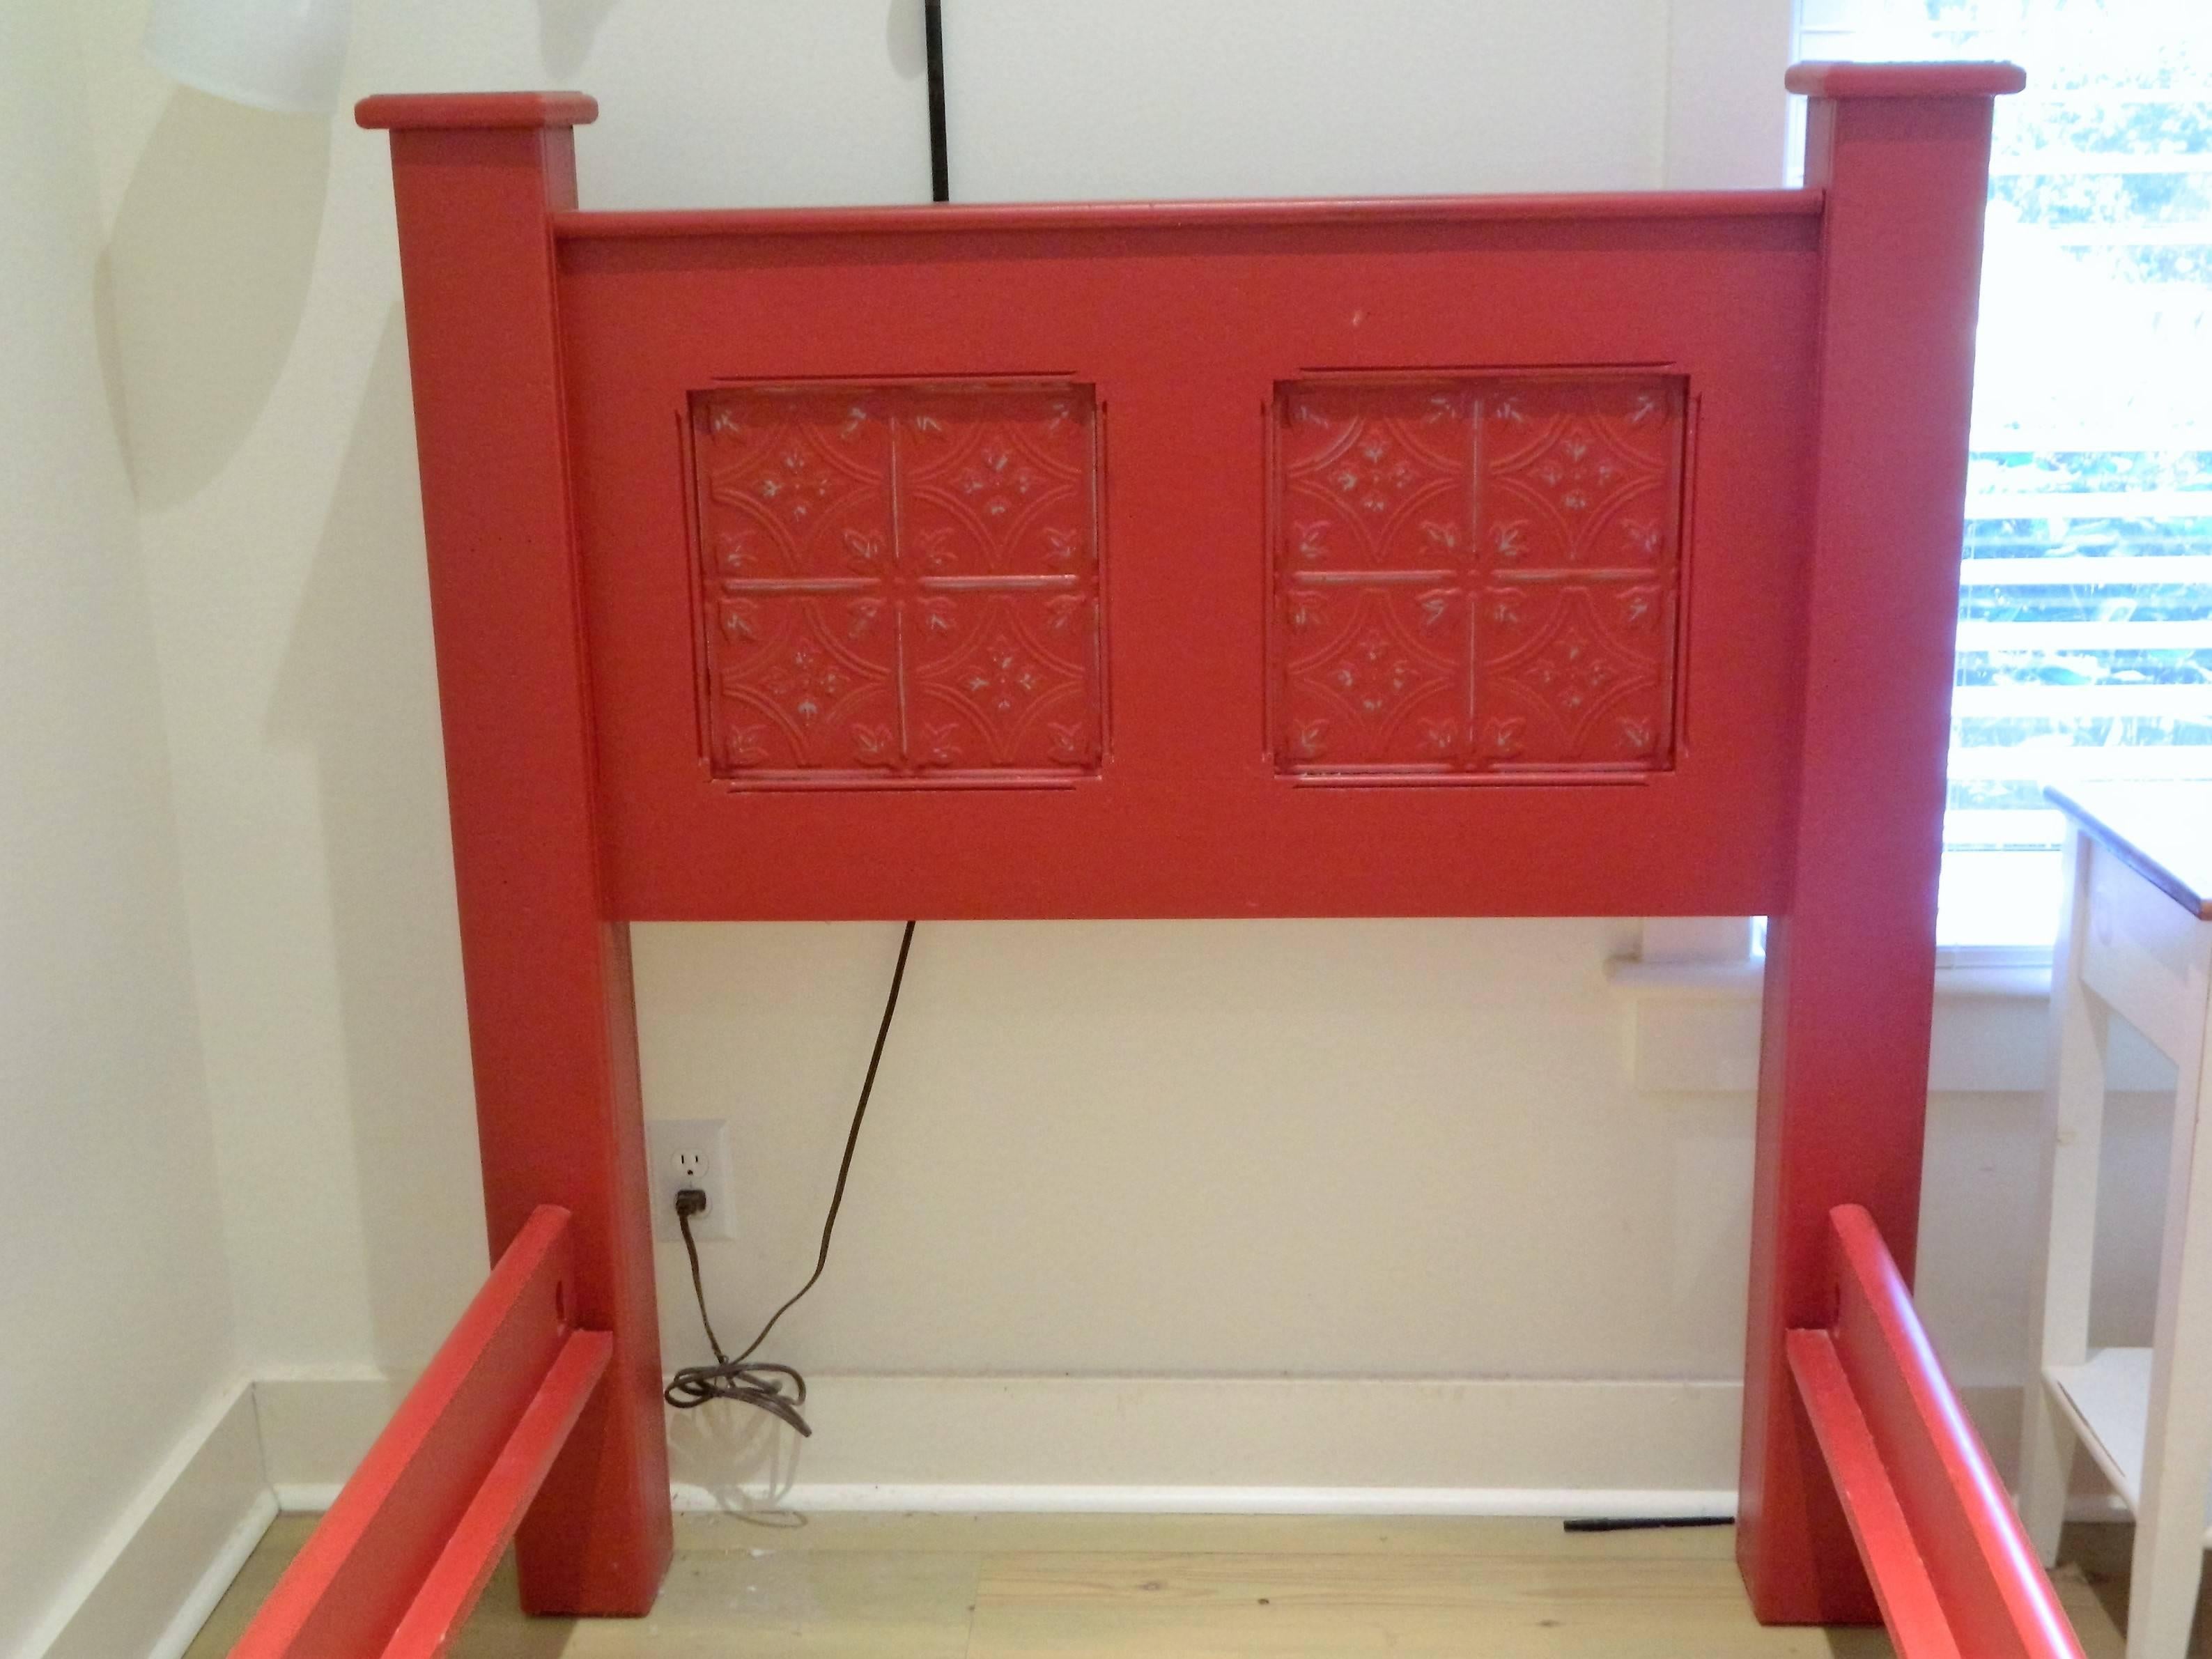 Pair of painted twin size beds, 20th century. Measures: 45.25" W x 84" L x 49.5" H - 37" height of footboard.
 